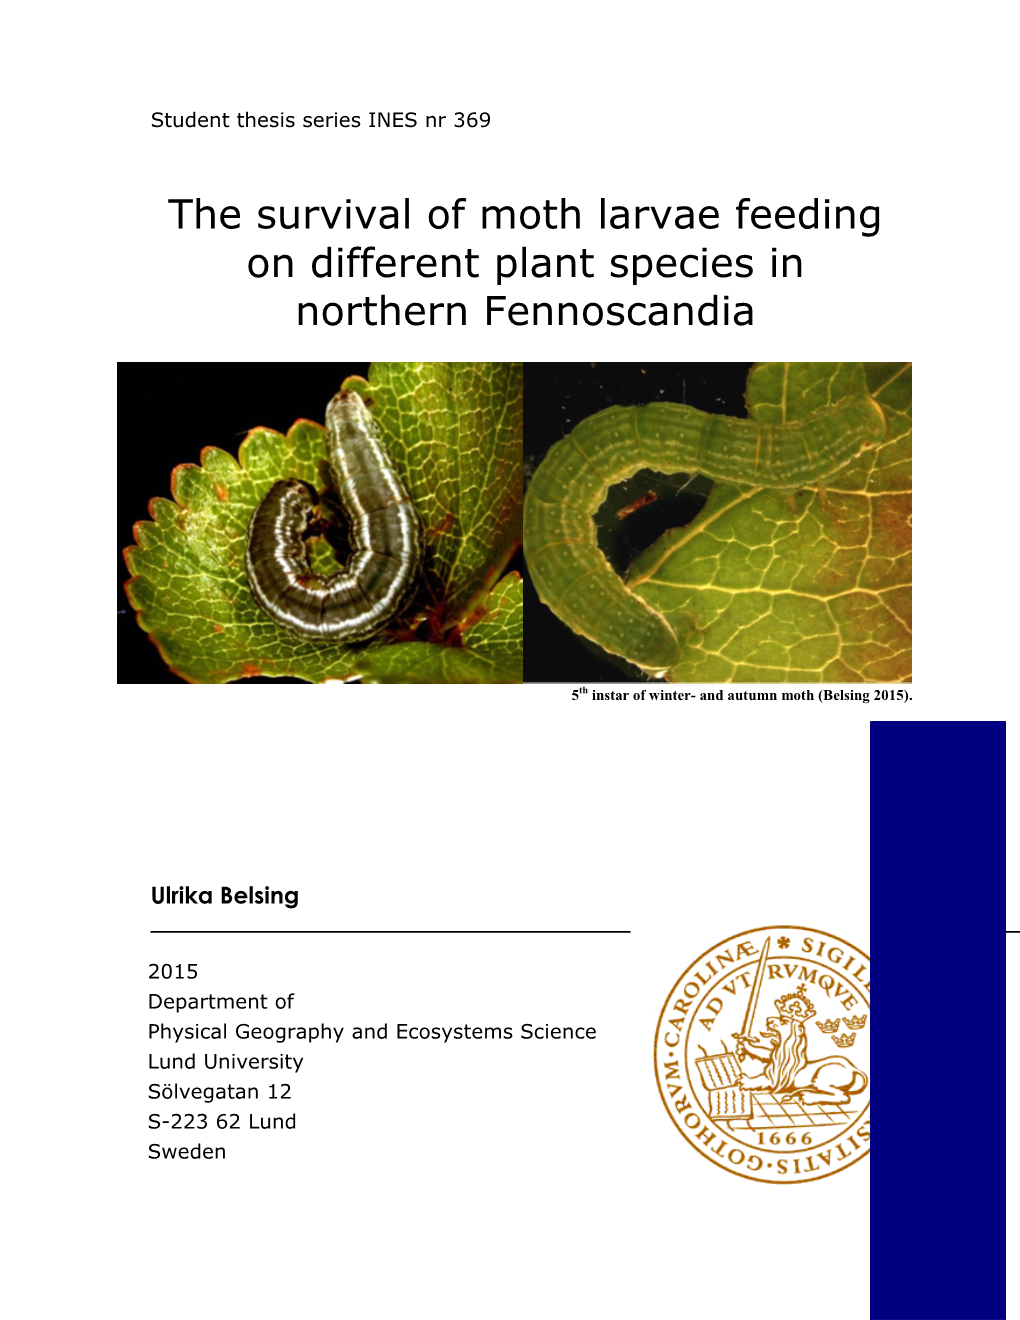 The Survival of Moth Larvae Feeding on Different Plant Species in Northern